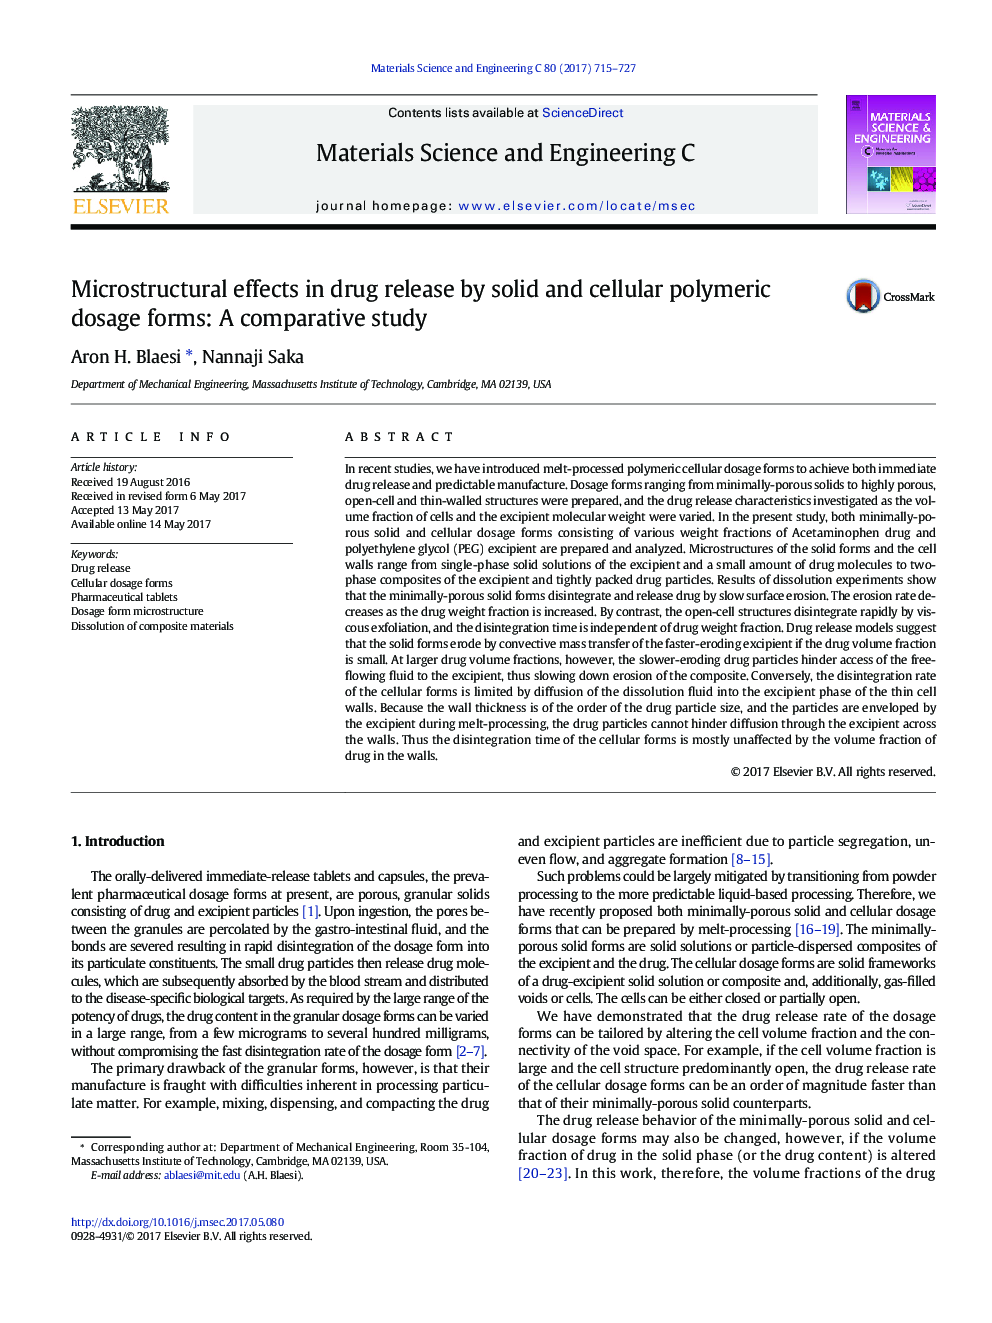 Microstructural effects in drug release by solid and cellular polymeric dosage forms: A comparative study